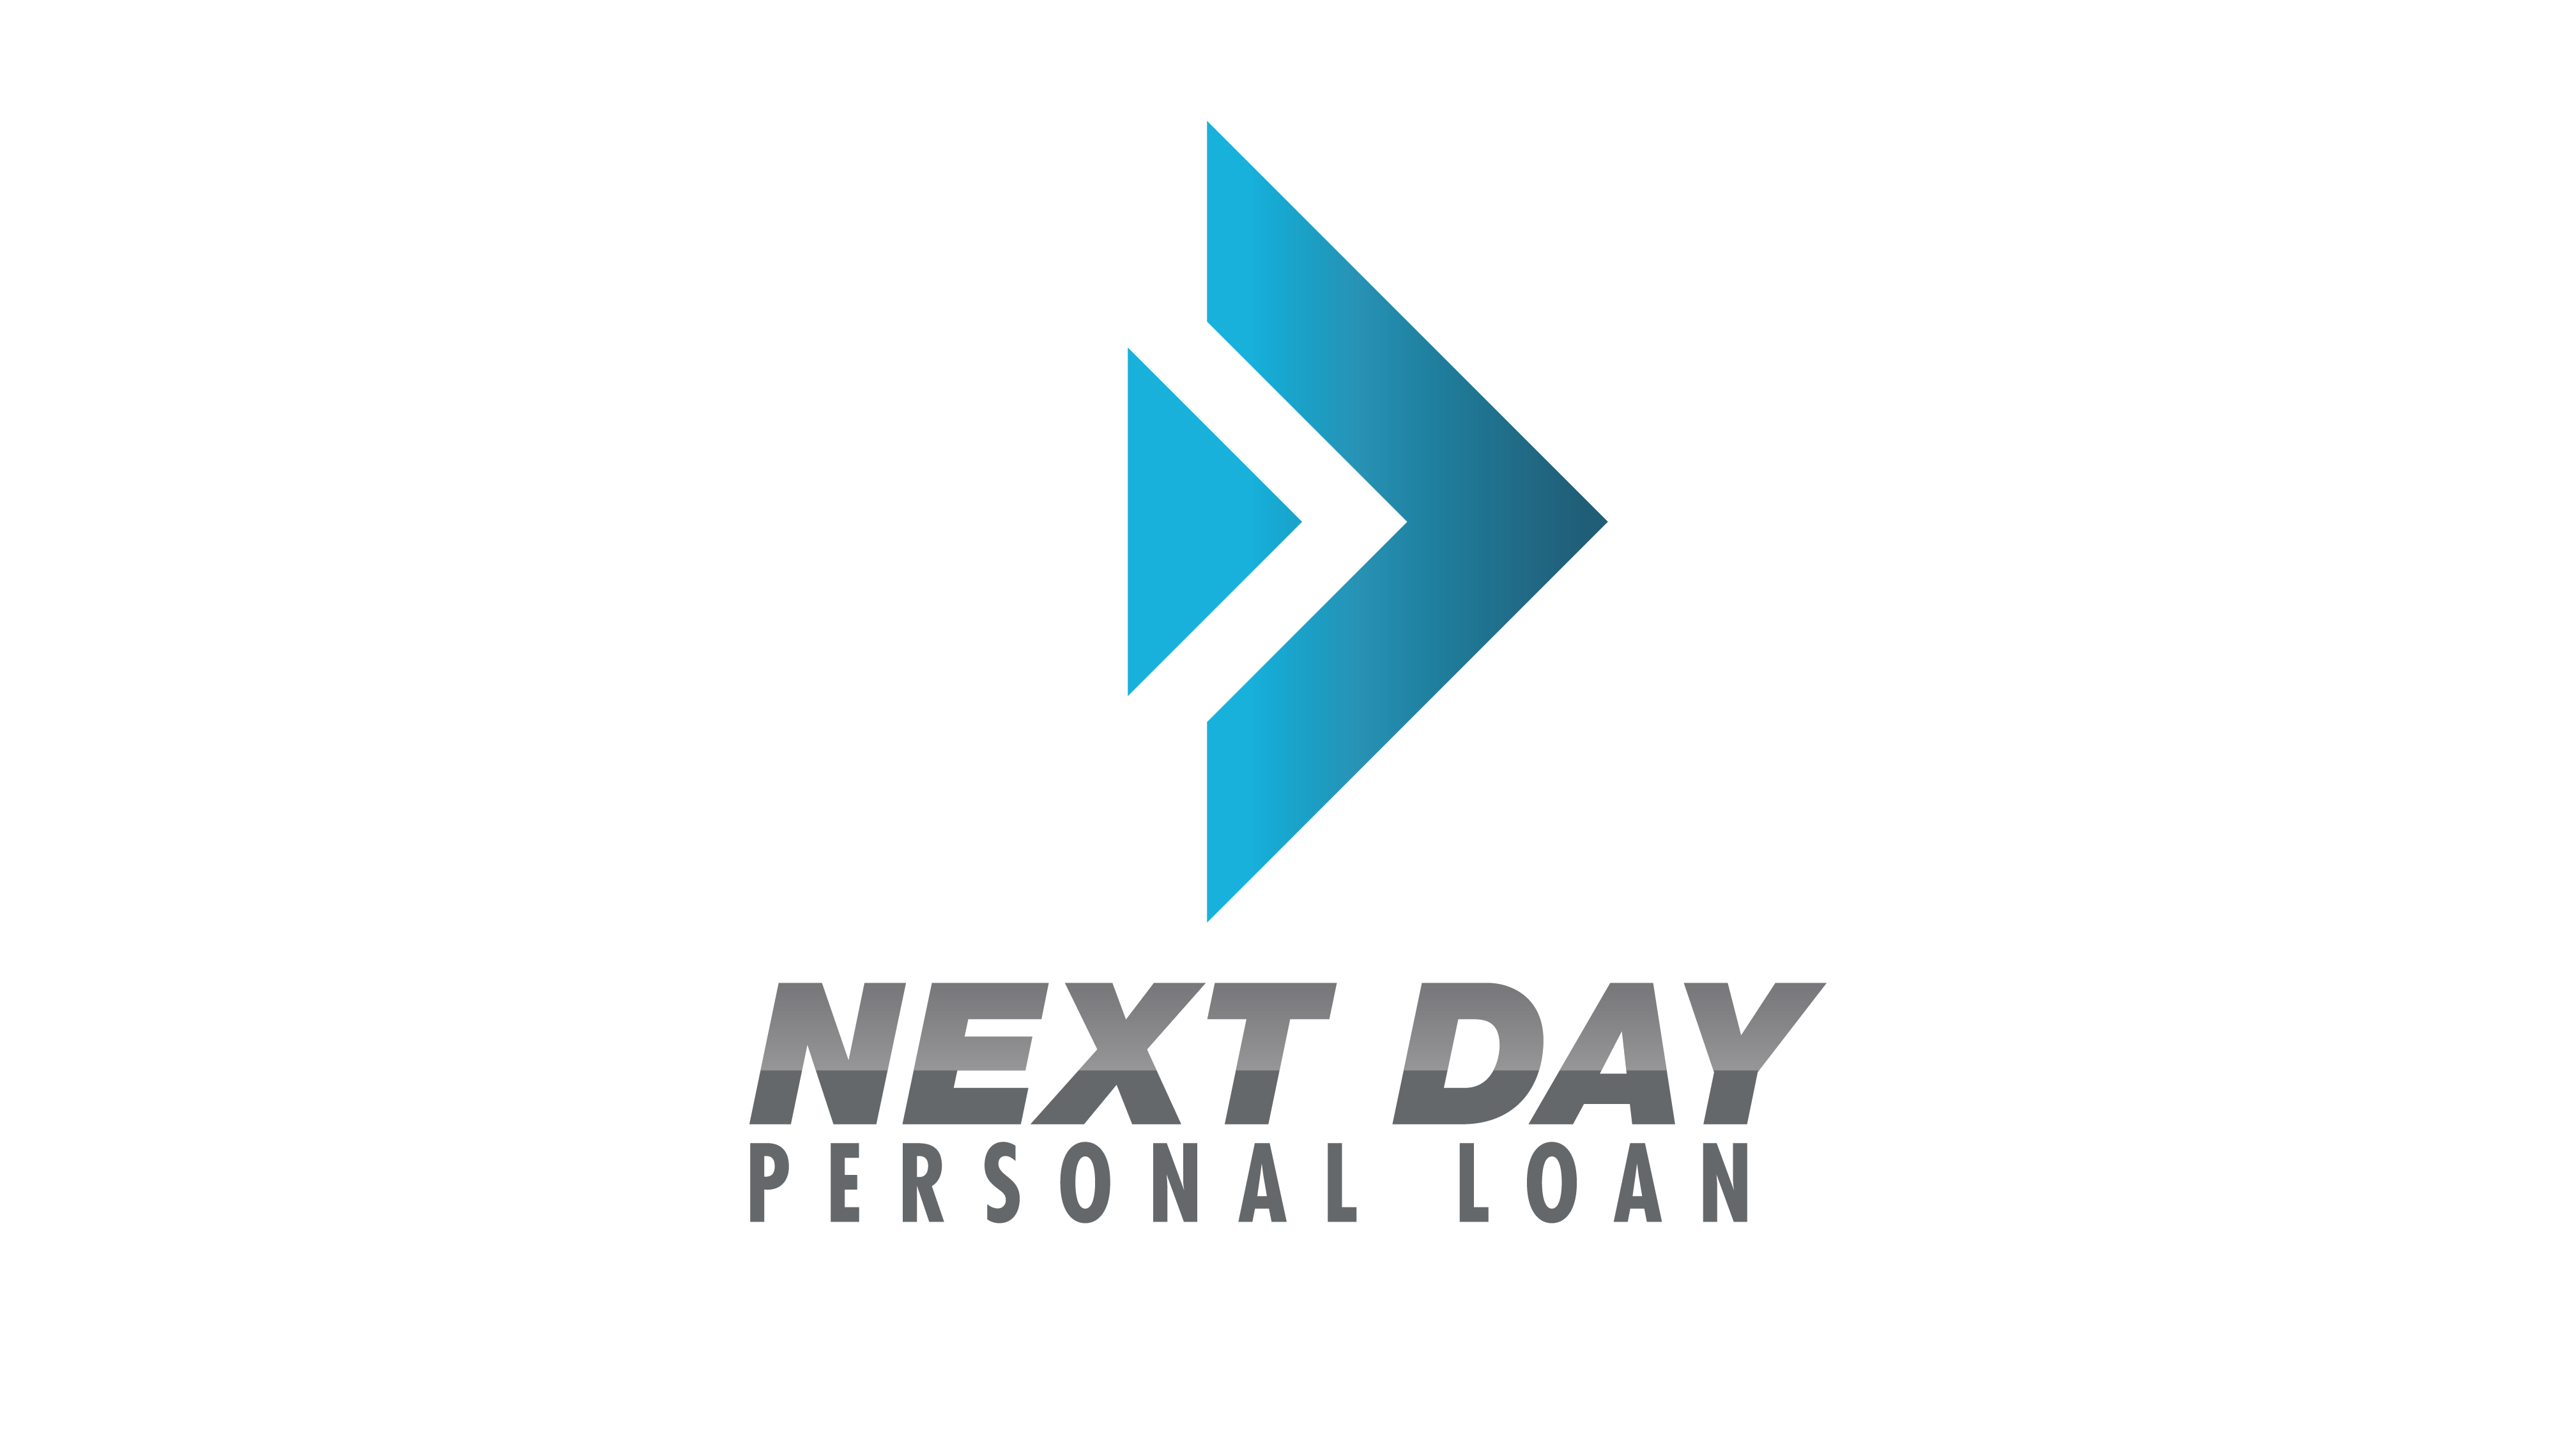 See what are the benefits of the Next Day Personal Loan. Source: The Lead Group.